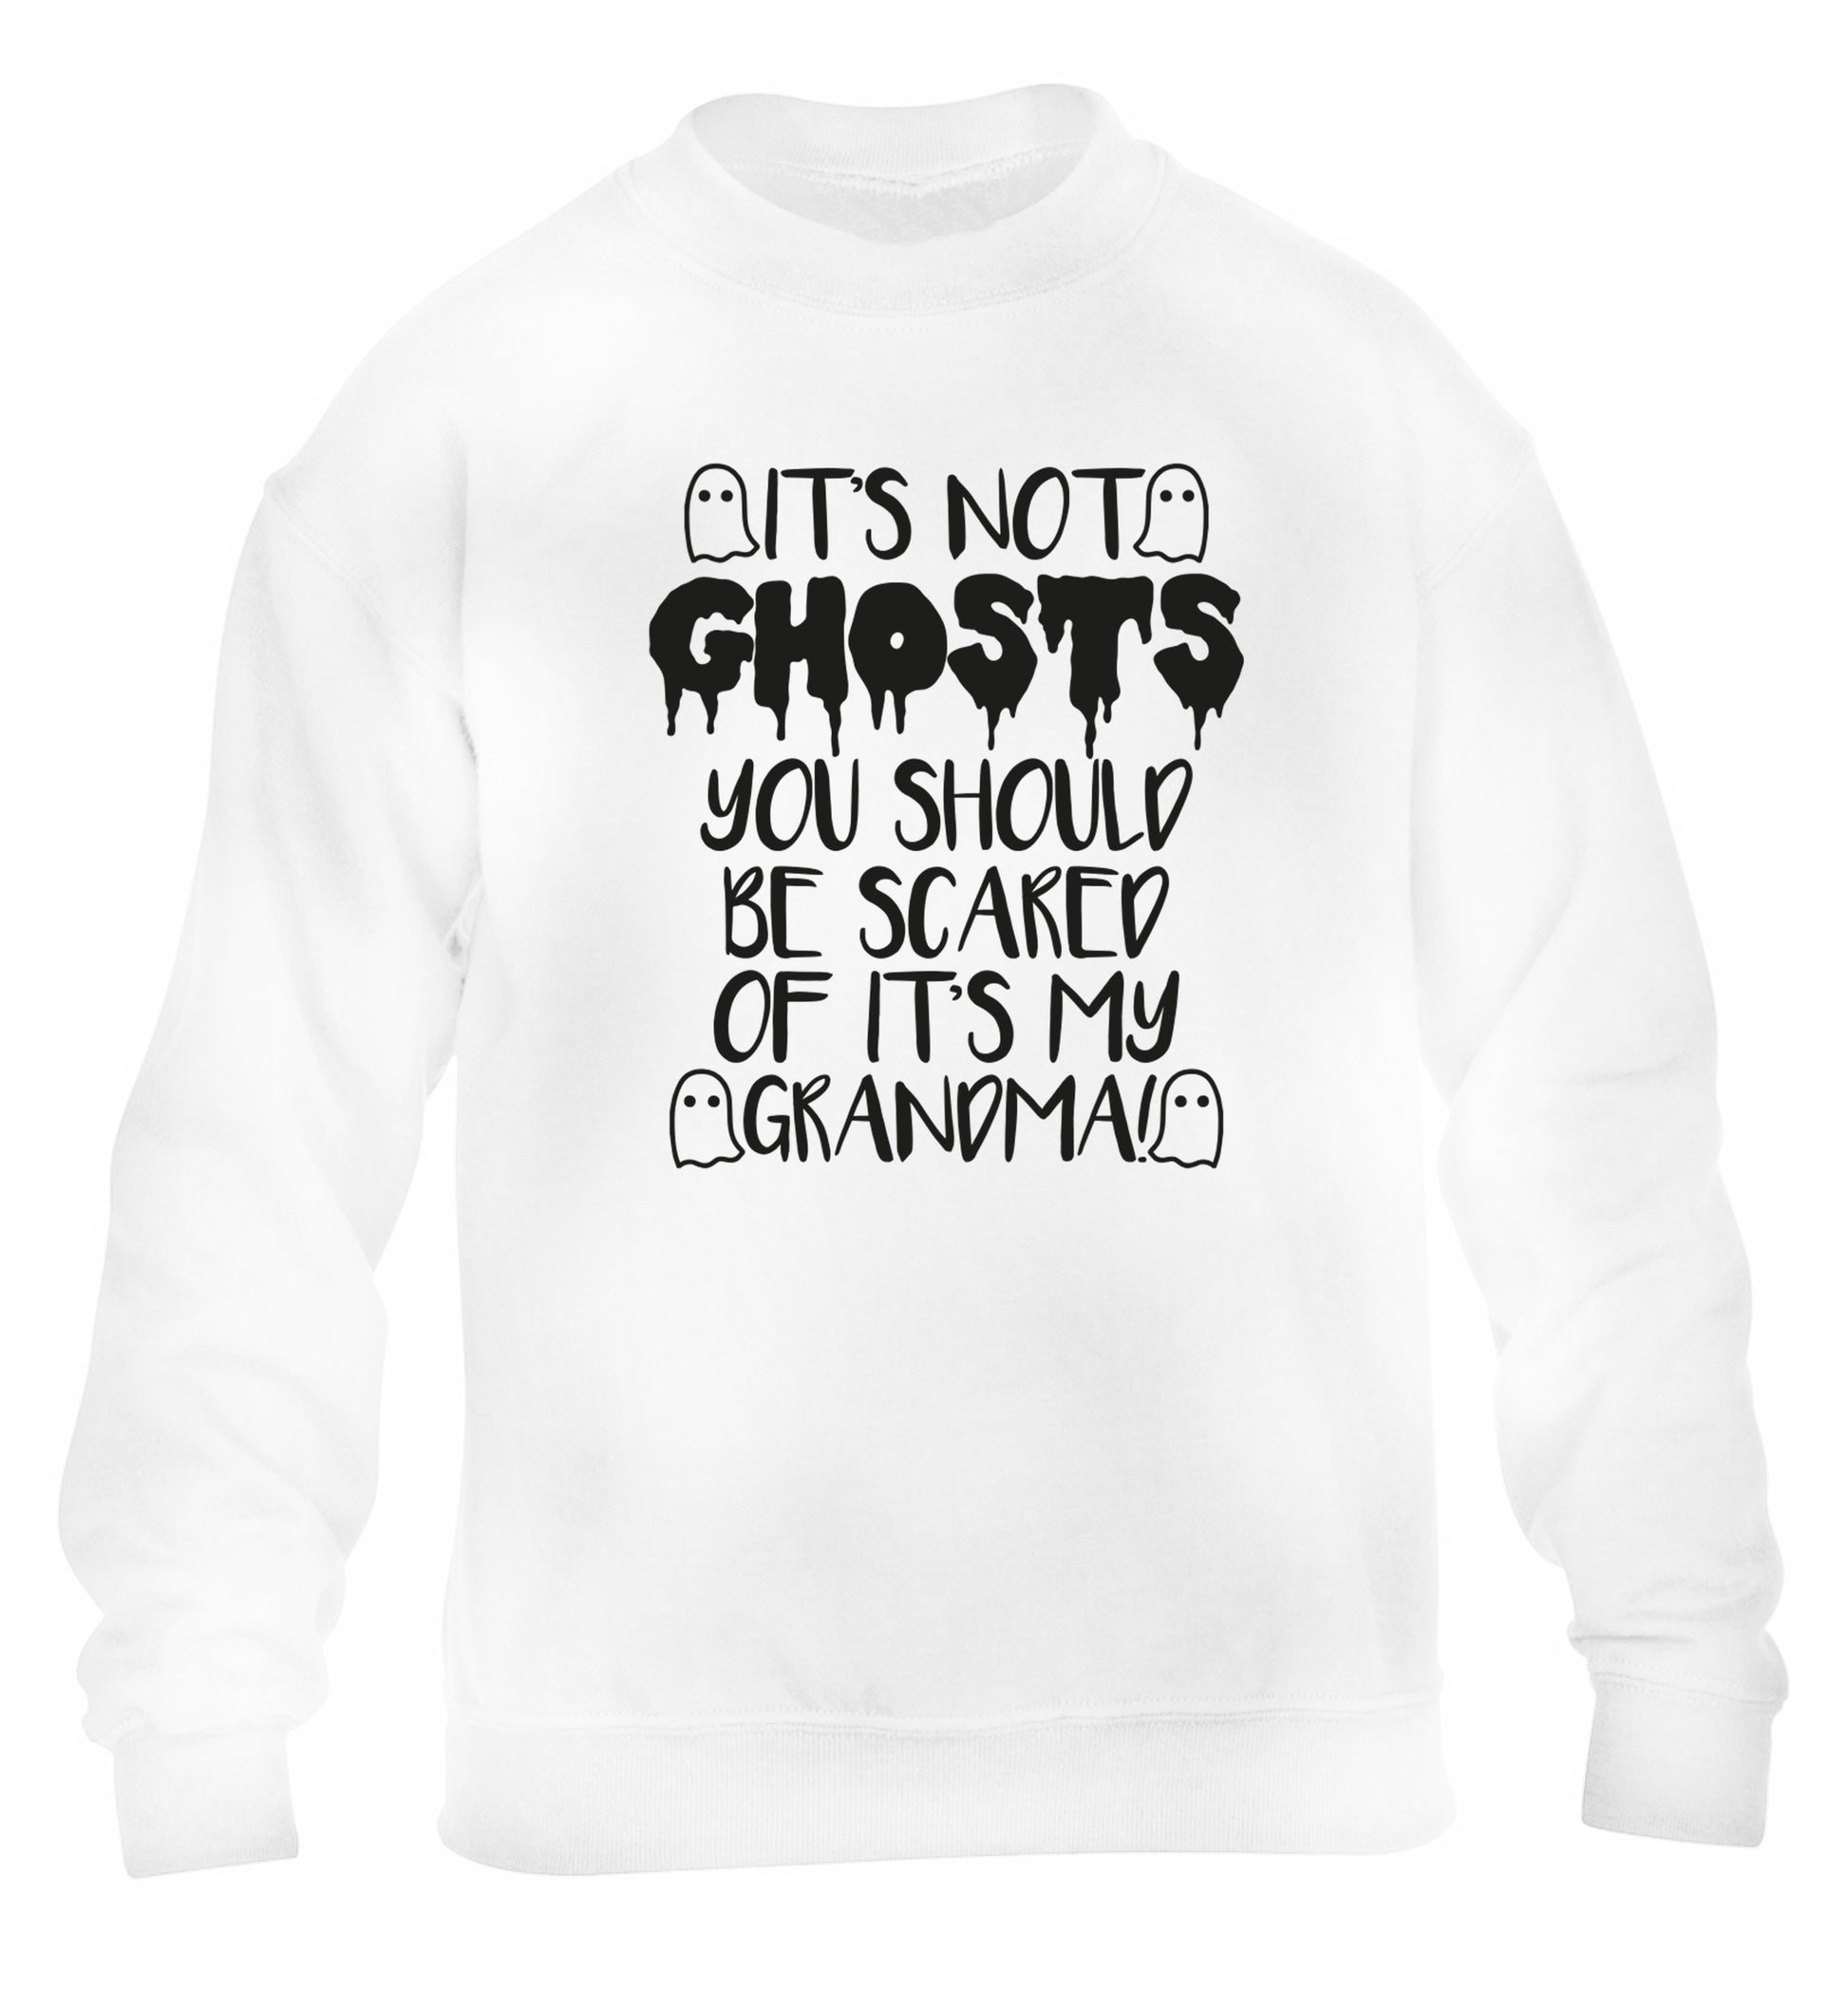 It's not ghosts you should be scared of it's my grandma! children's white sweater 12-14 Years